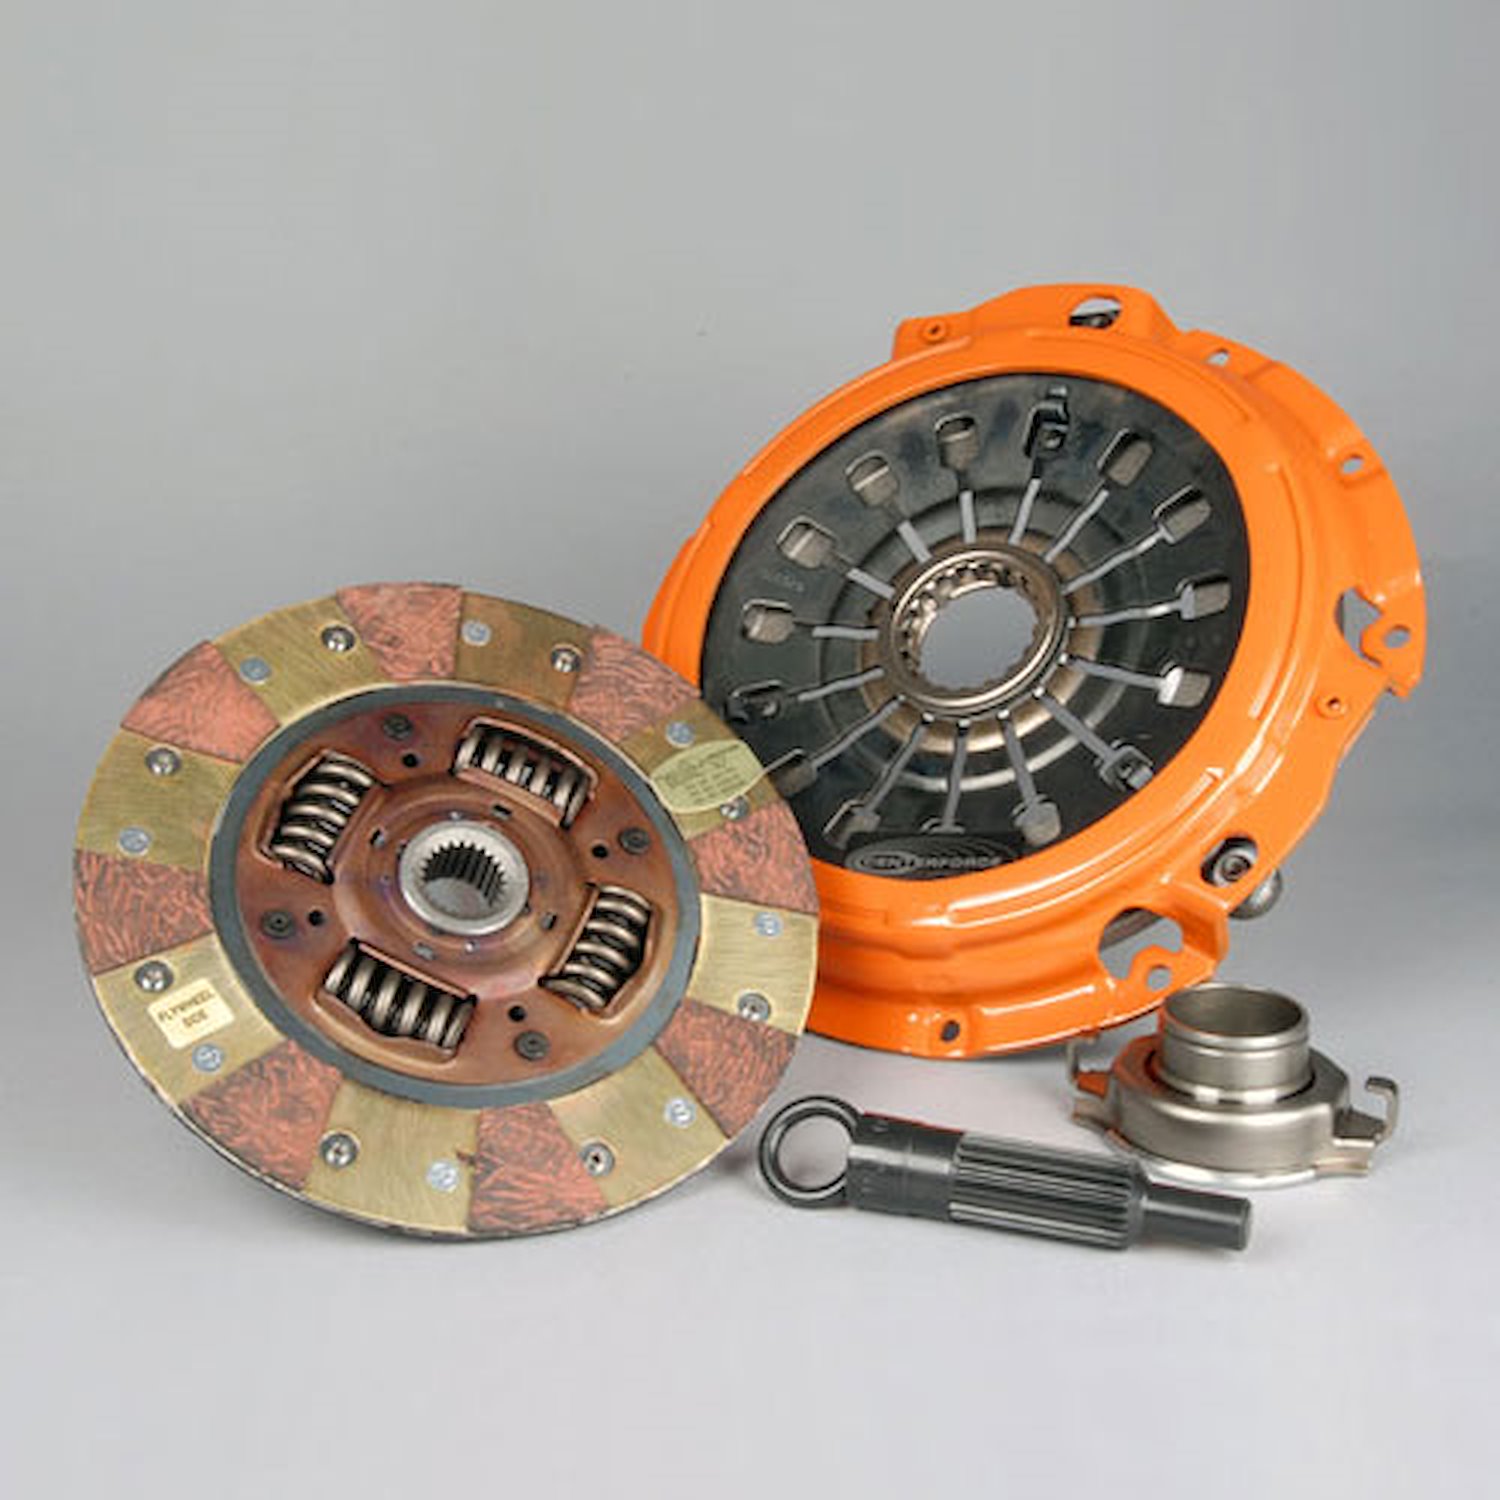 Dual Friction Clutch Includes Pressure Plate, Disc, Throw-Out Bearing, Pilot Bearing and Alignment Tool